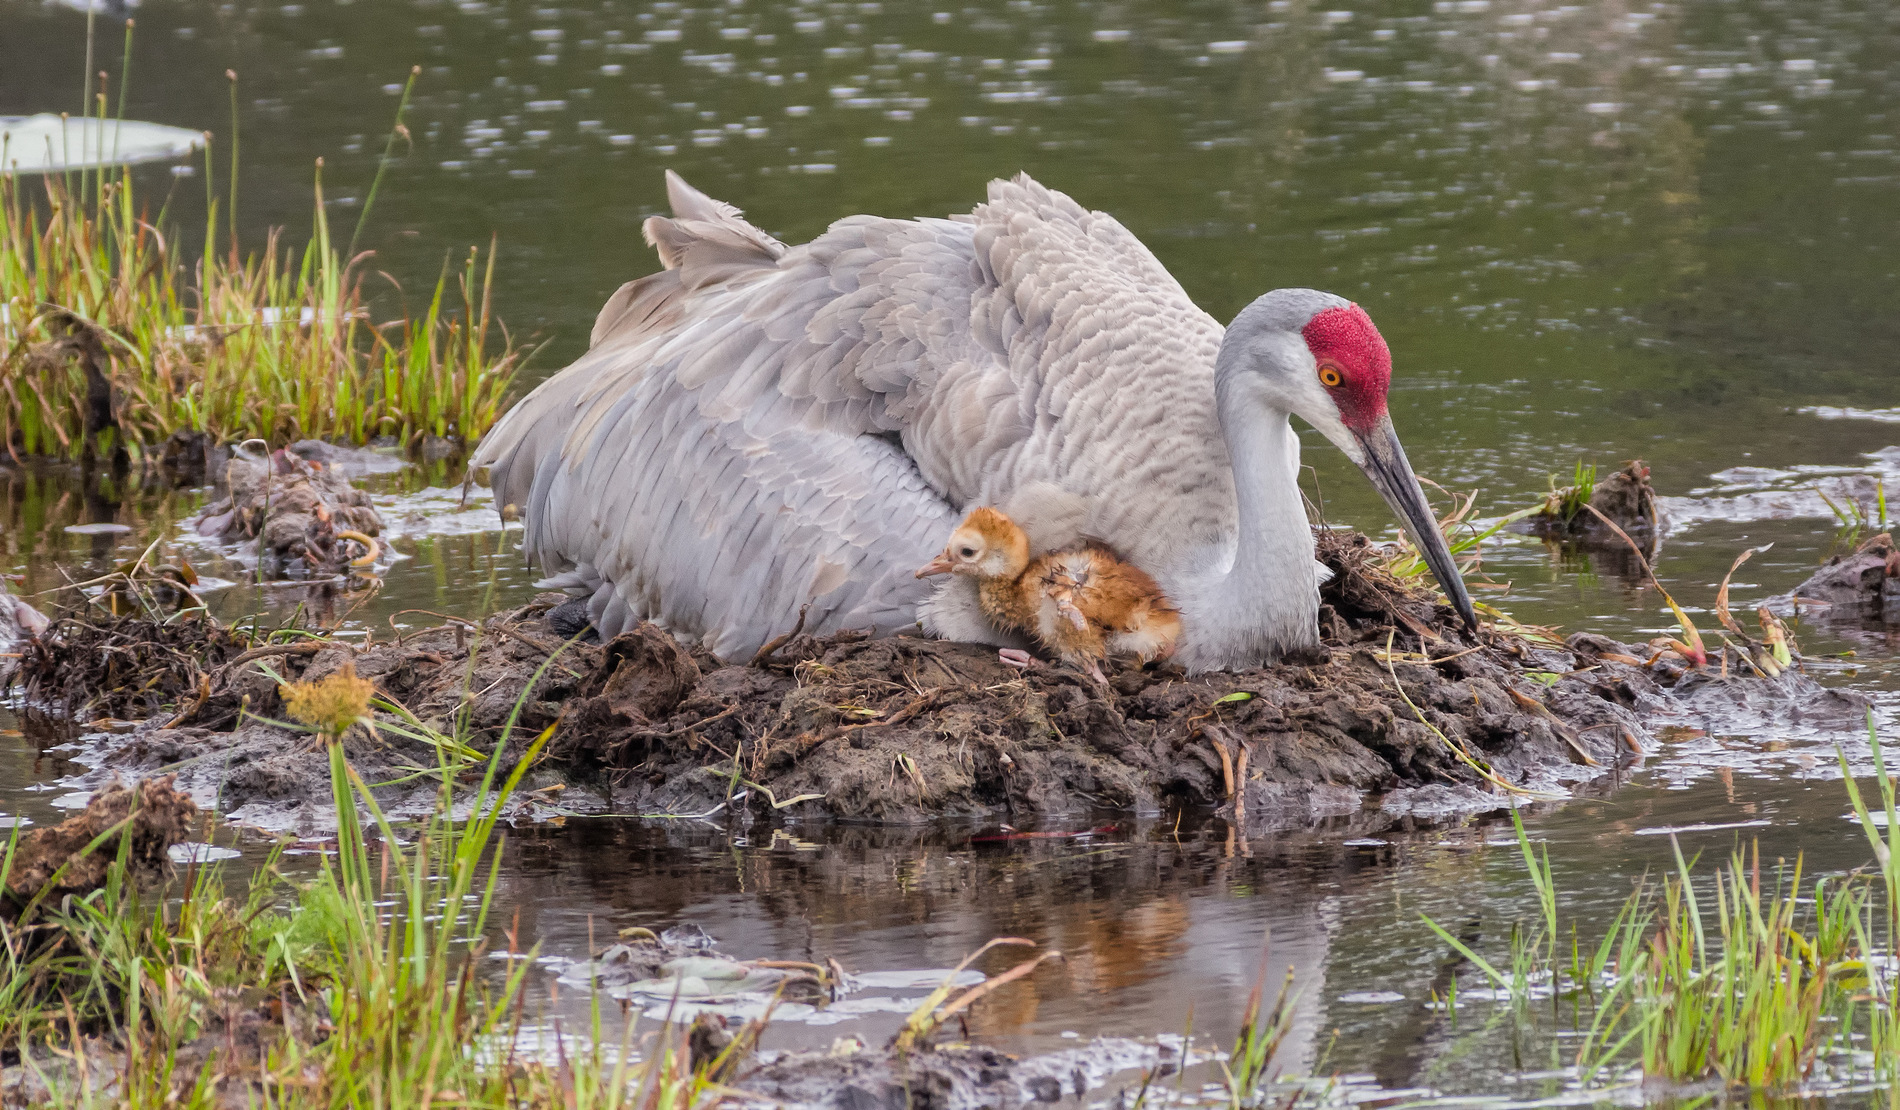 A large gray bird with a red crown nests in an open wetland with a small chick poking out from under its mother.